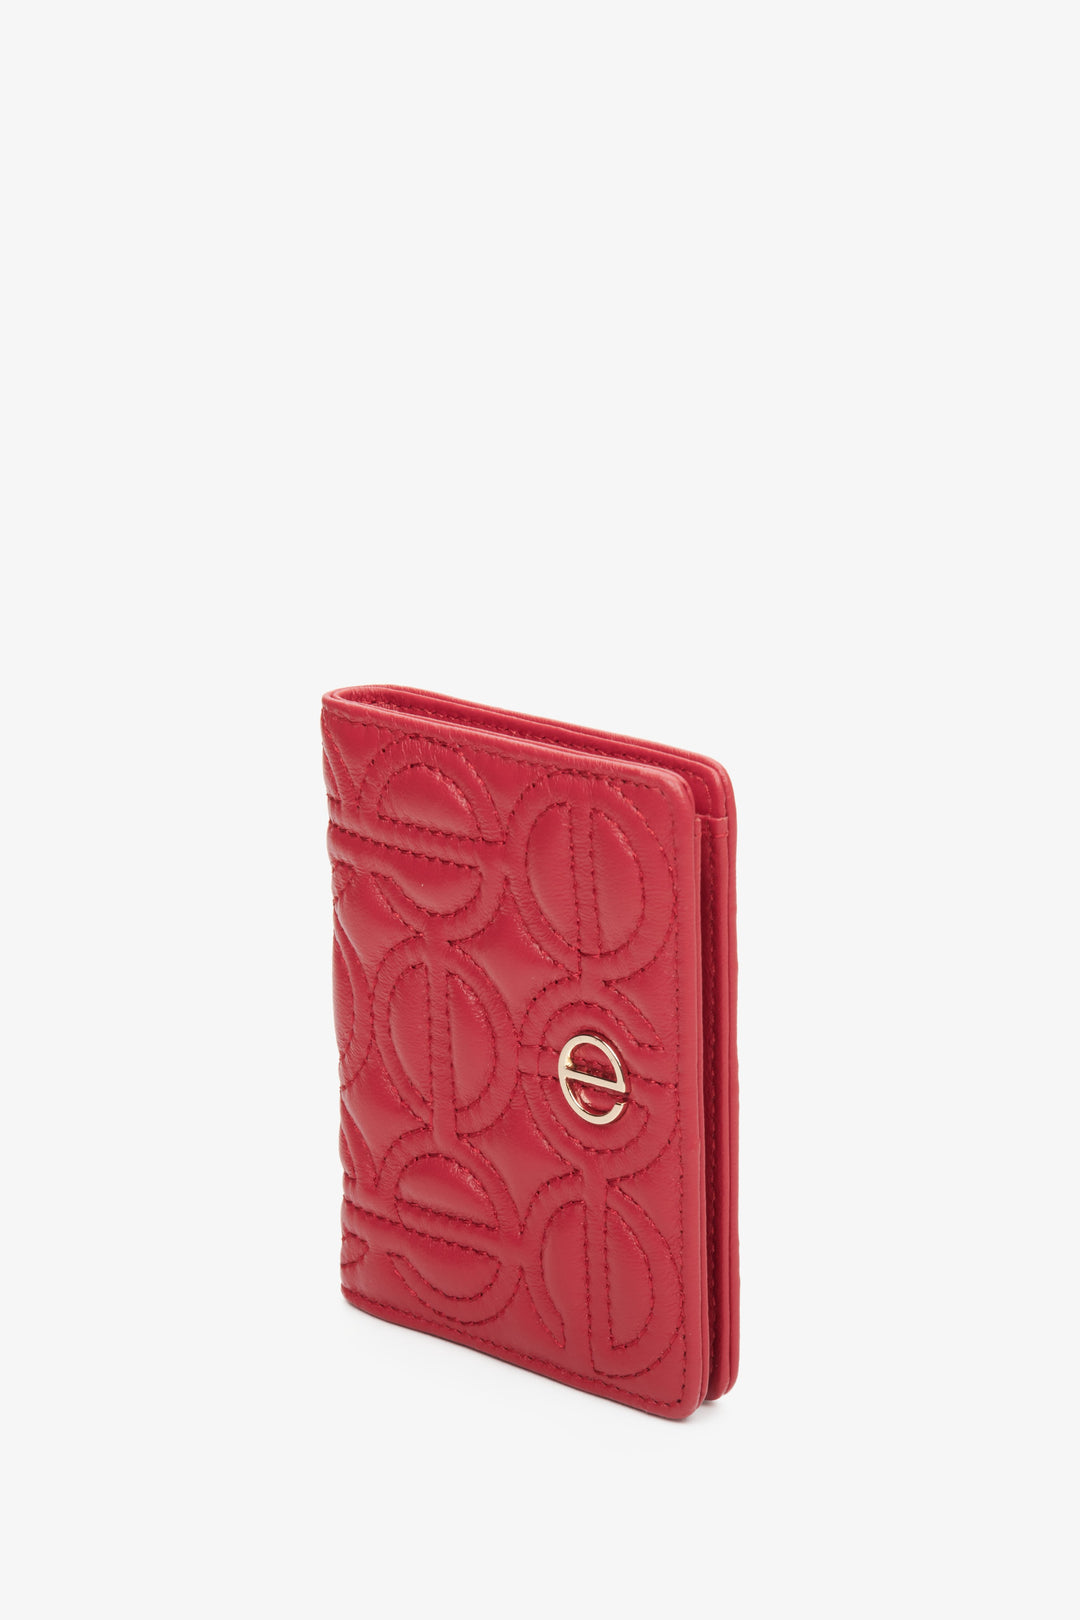 Small women's red card leather wallet with silver accents by Estro.